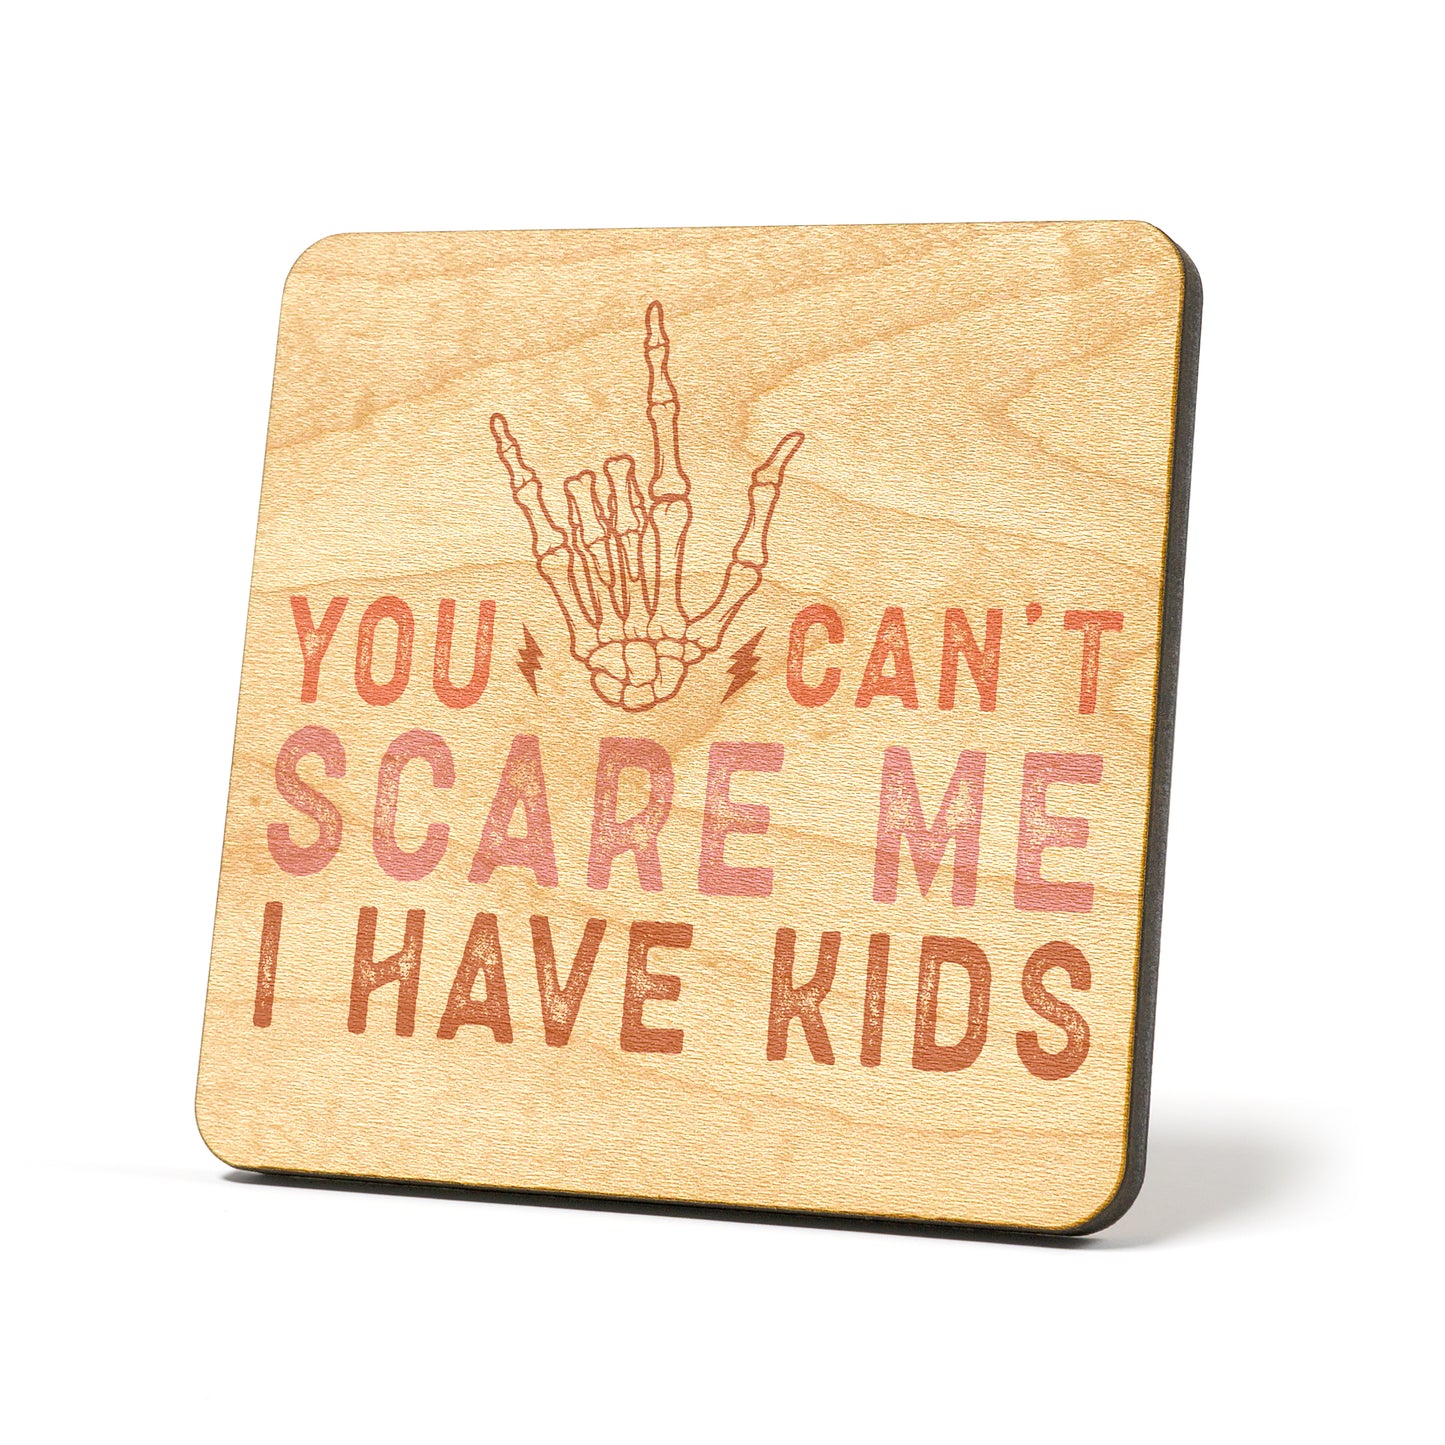 I have kids Graphic Coasters